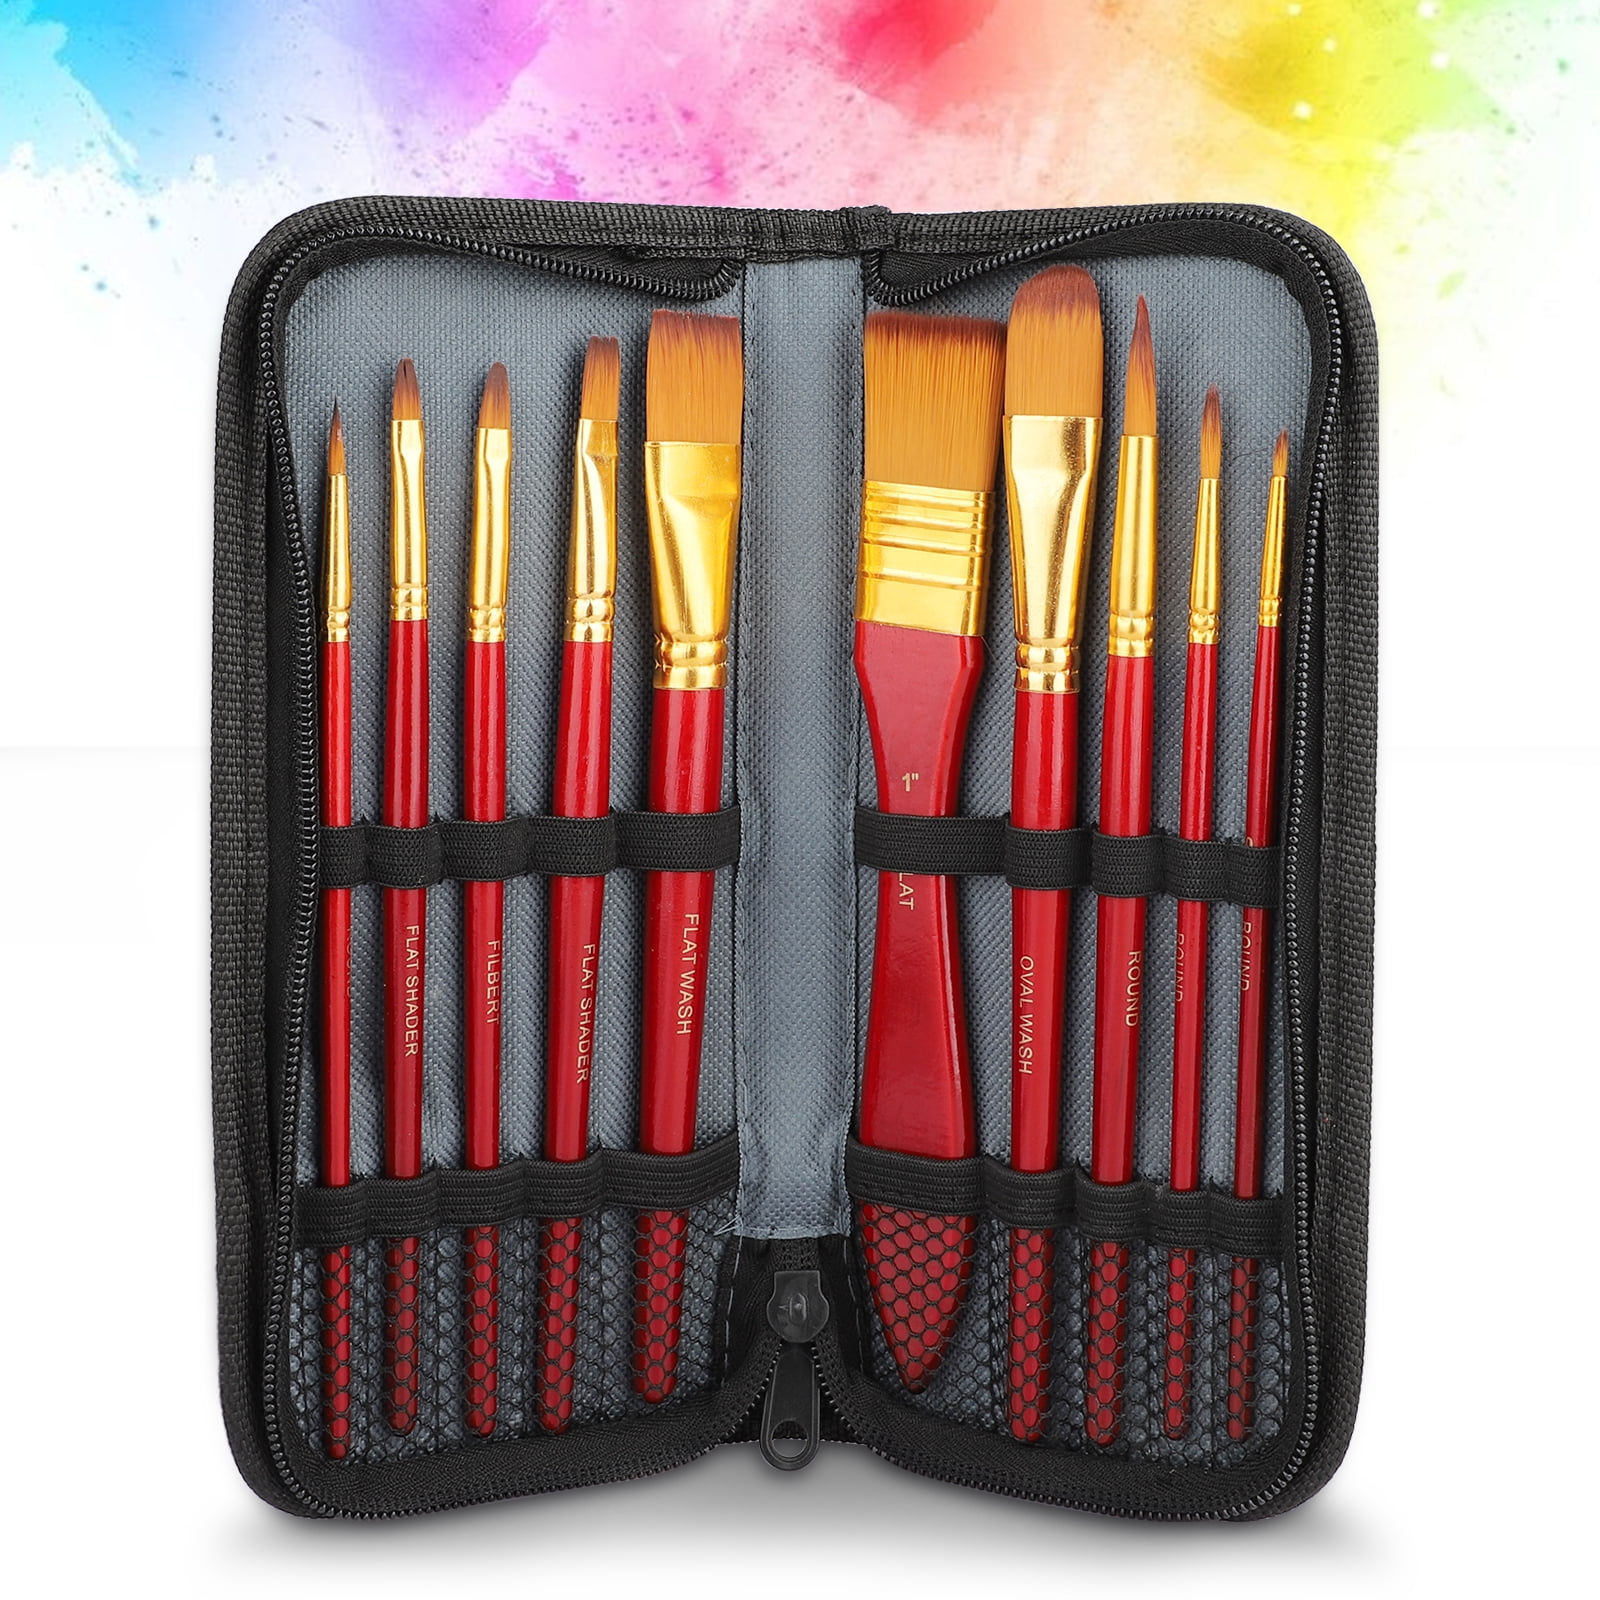  ETCHR Set of 8 Gouache Paint Brushes - Synthetic Paint Brush  Set - Travel Watercolor Brushes with Linen Roll-Up Pouch - Synthetic Paint  Brushes with Travel Case - Paint Brushes for